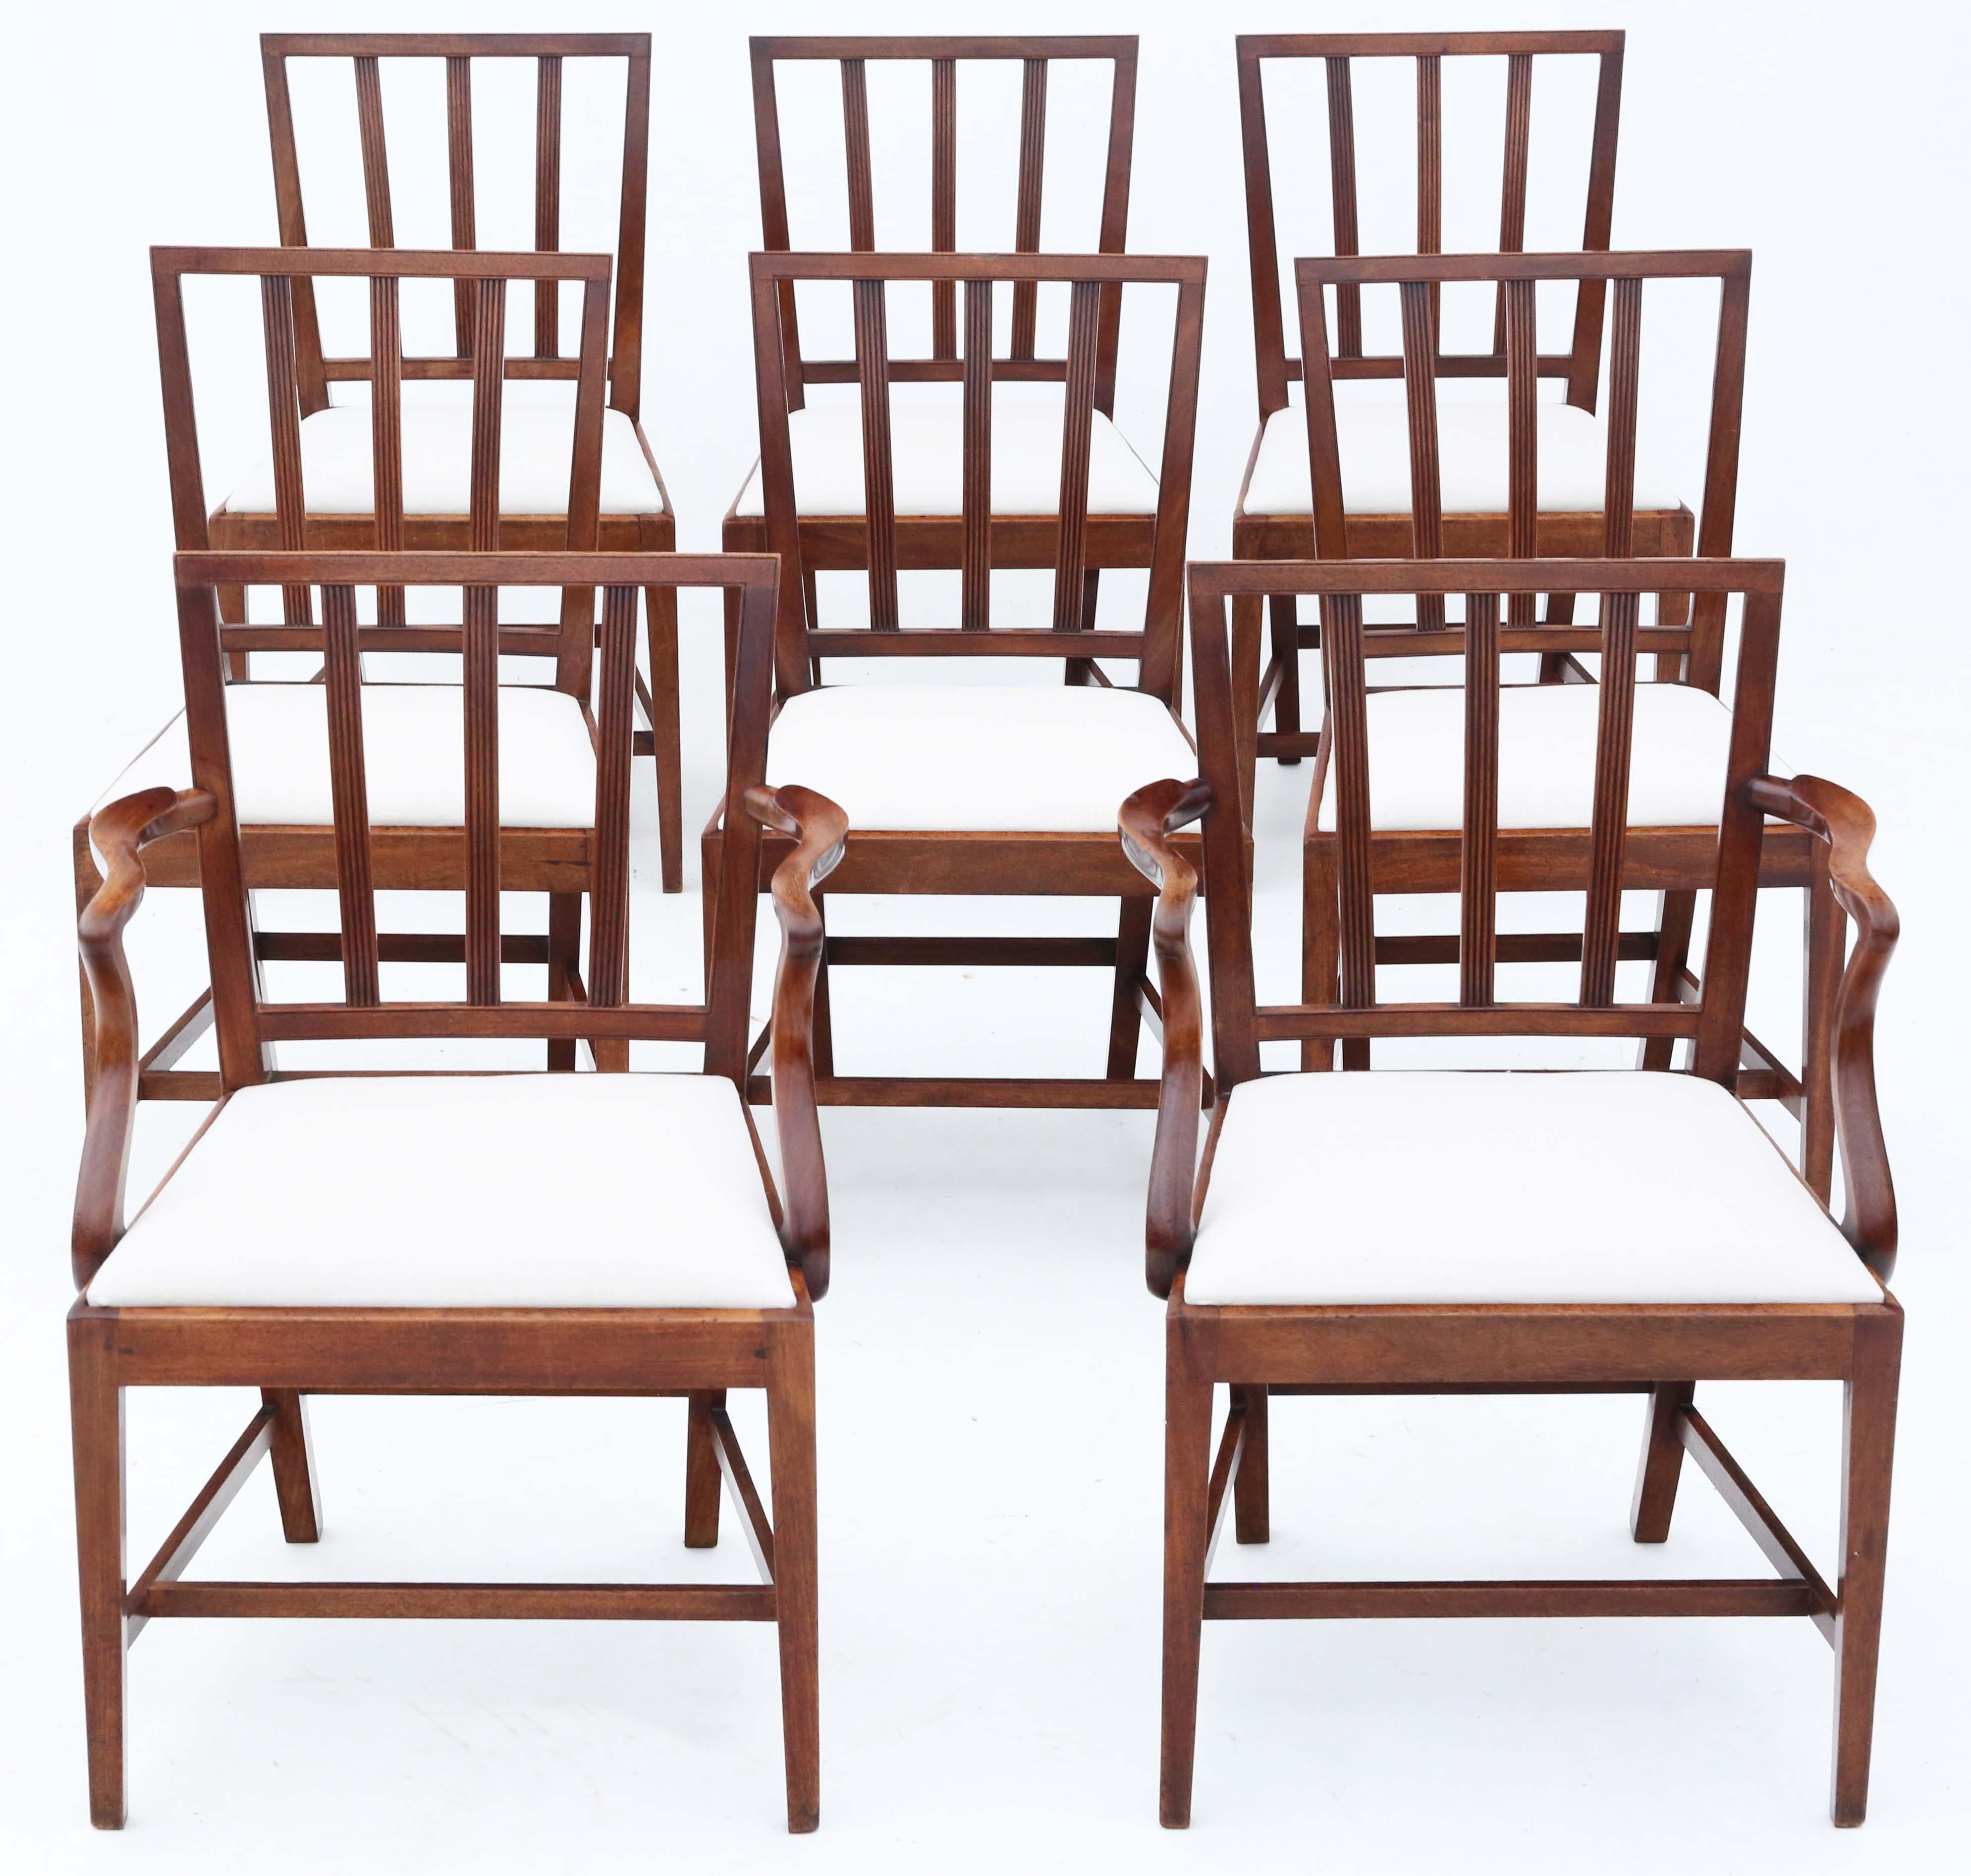 Explore the rare elegance of this exquisite set of 8 (6 plus 2) early 19th Century Regency mahogany dining chairs, showcasing a timeless design that reflects the sophistication of the era.

Crafted with meticulous attention to detail, these chairs